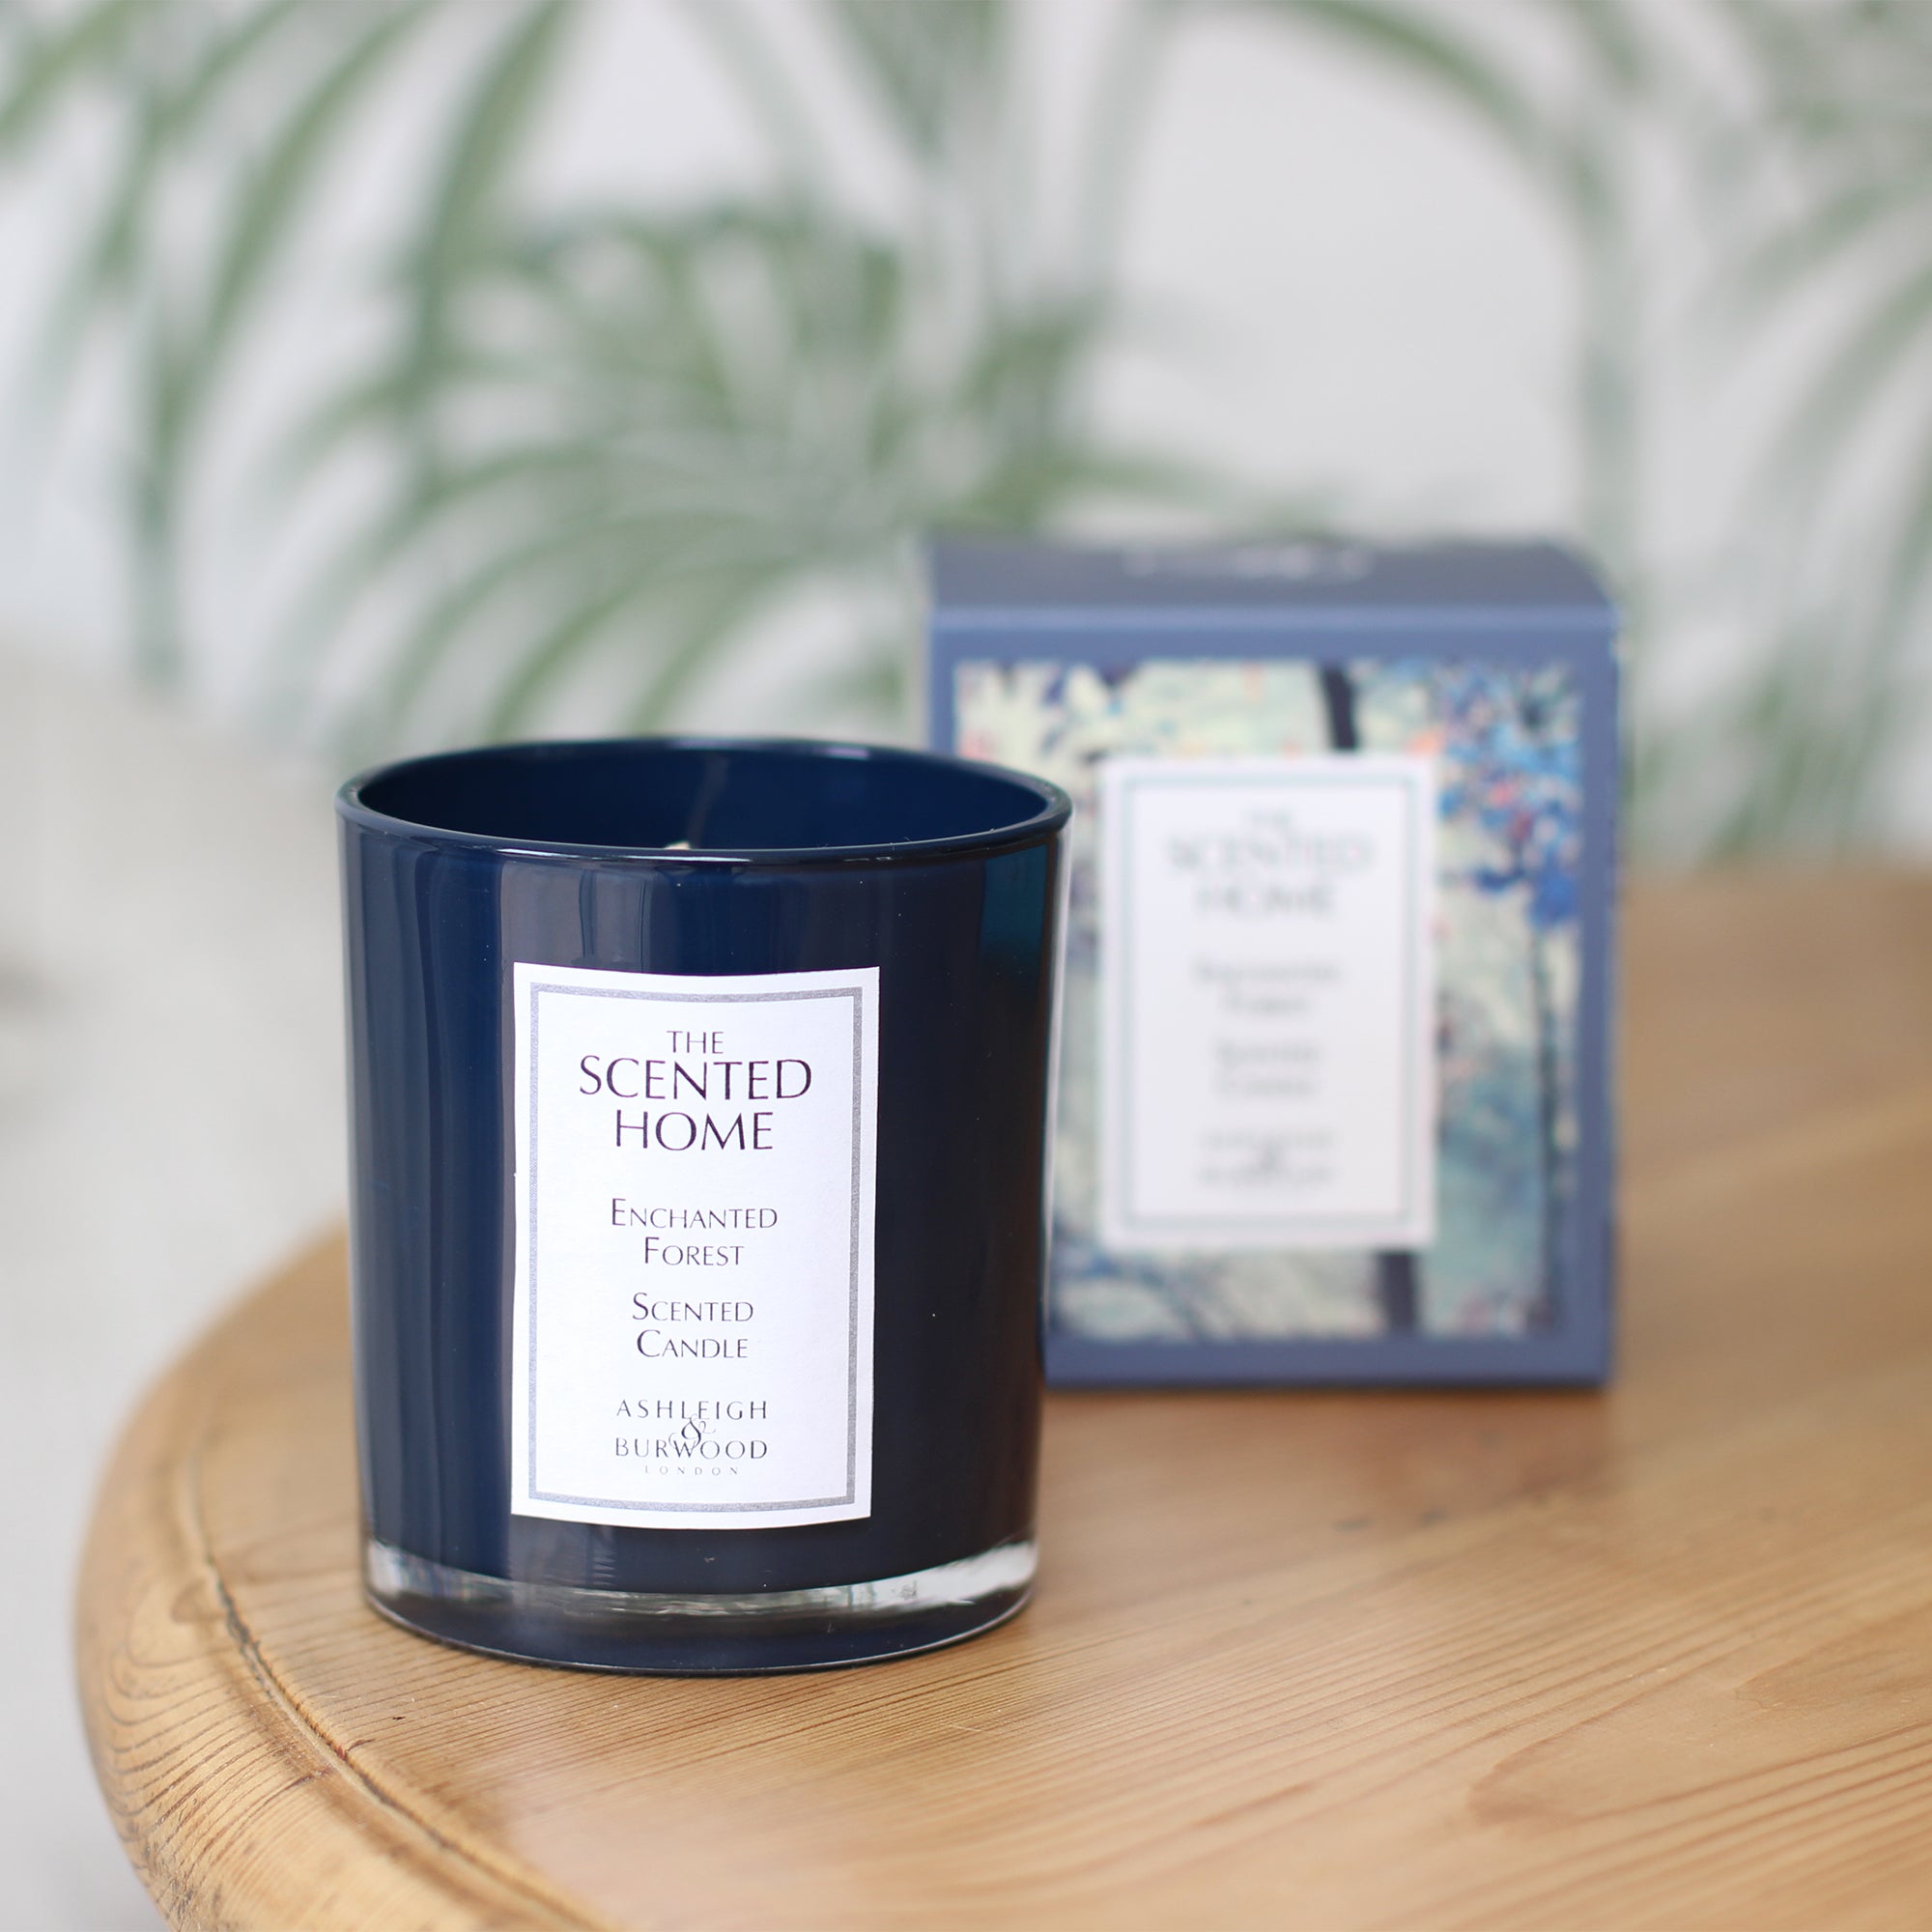 The Scented Home Enchanted Forest Candle